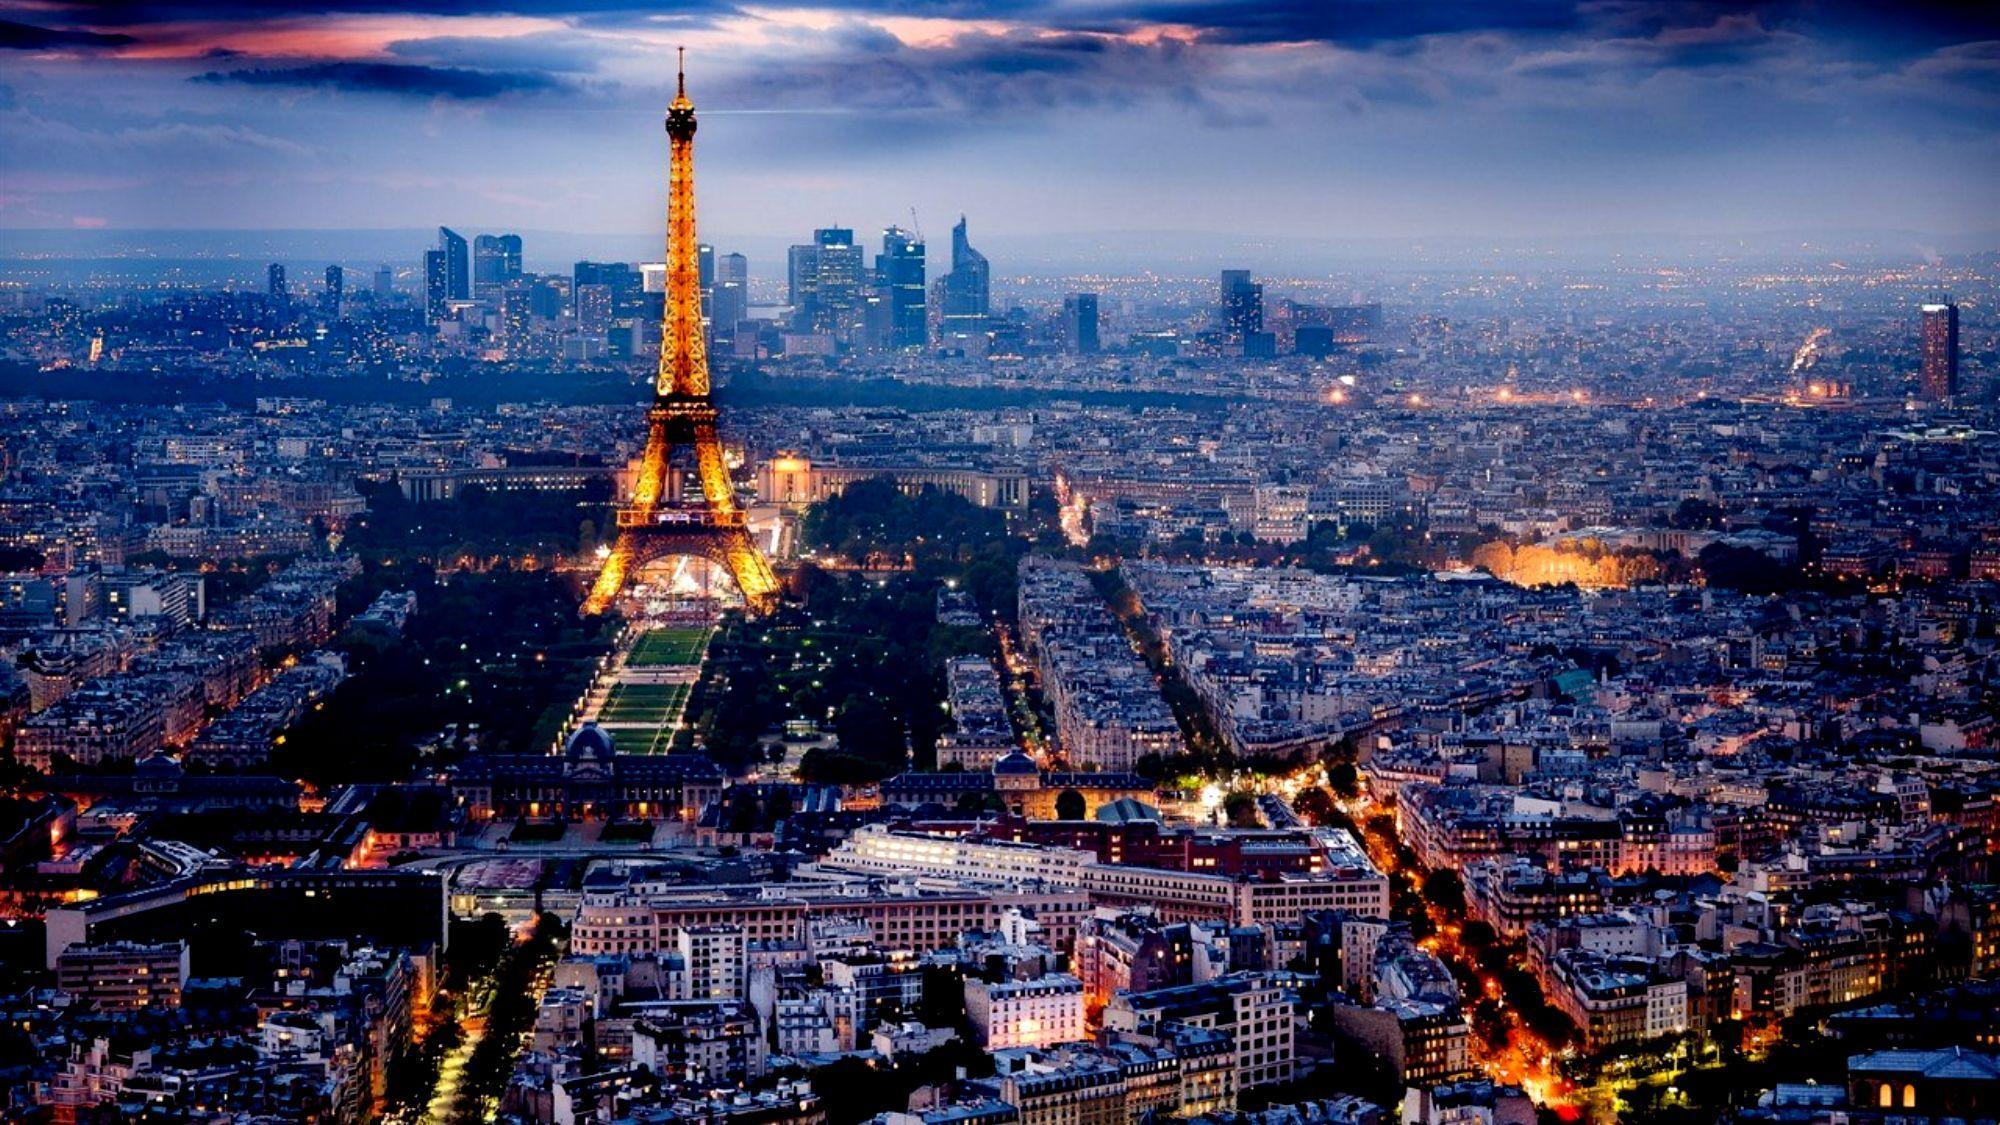 Download free Paris Wallpaper for your computer and laptop. You